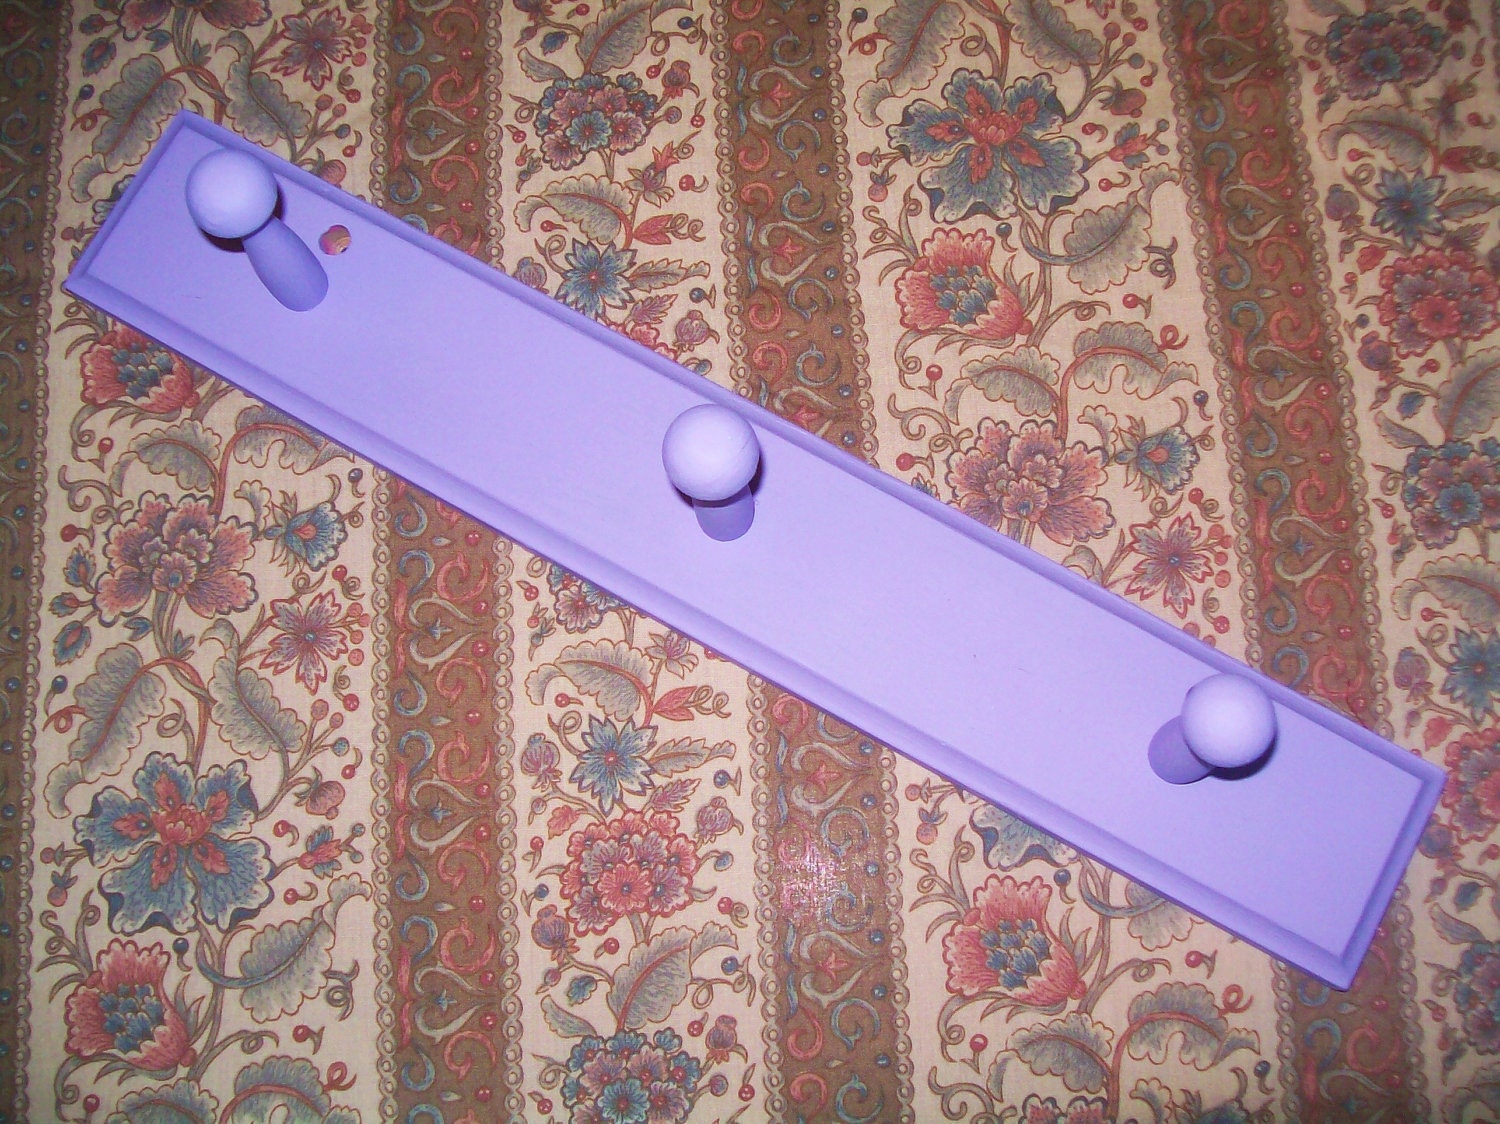 Wall coat purse hanger lavender shabby cottage chic repurposed recycled solid wood